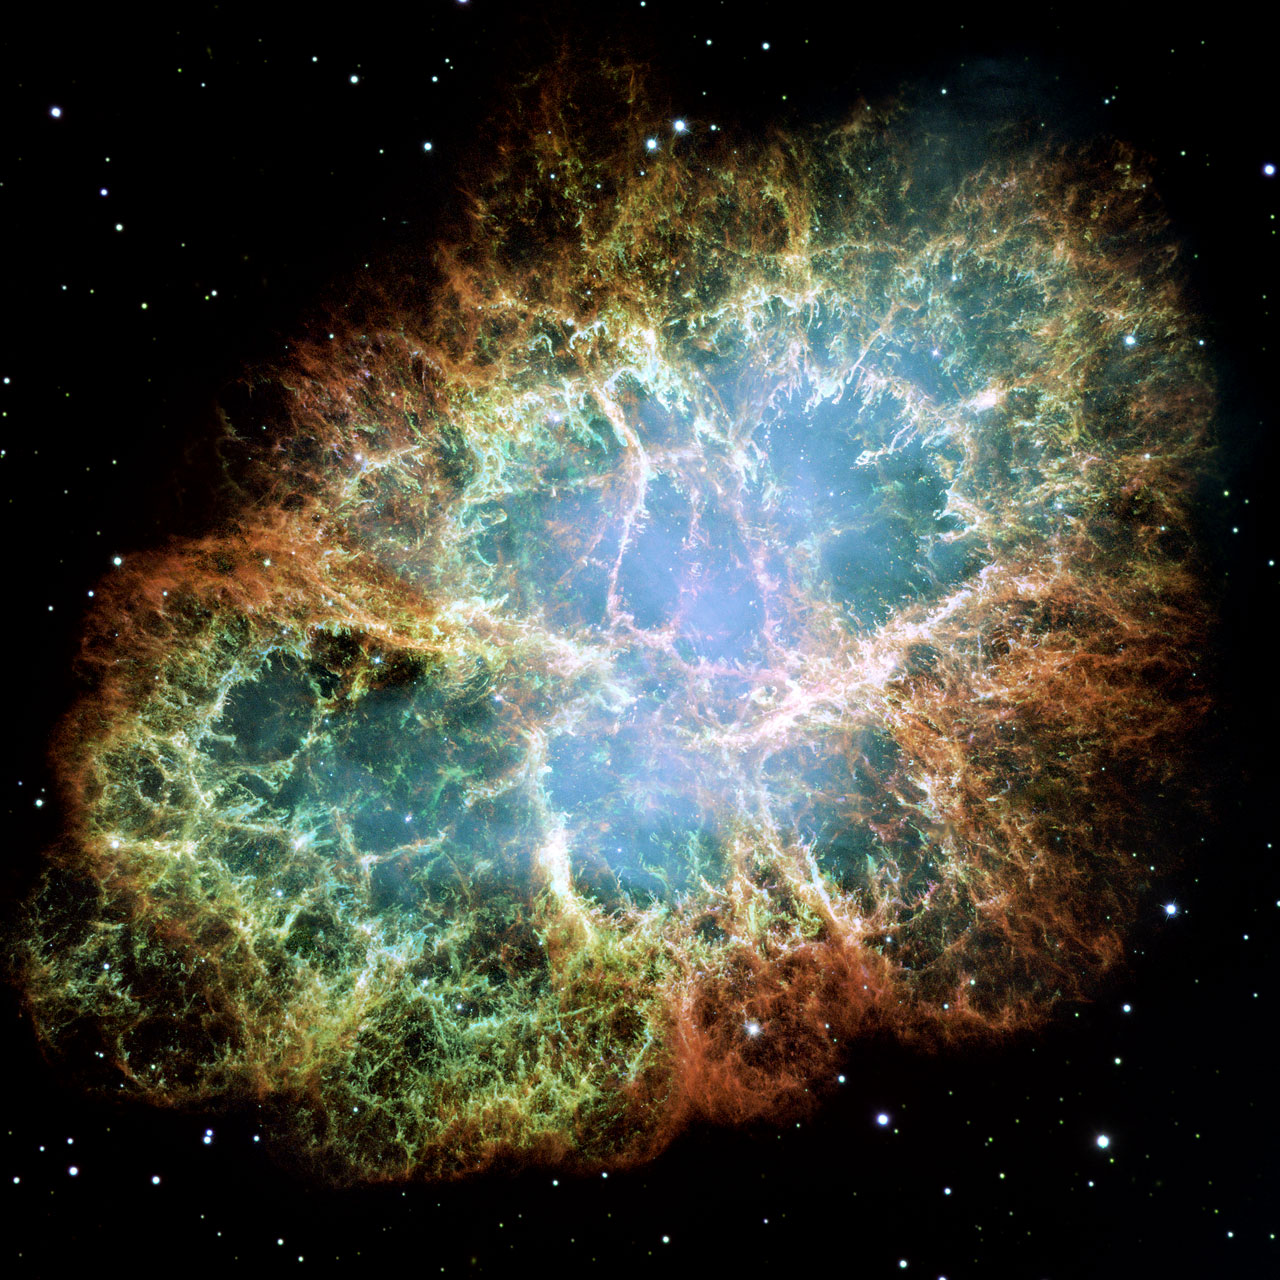 This Hubble image gives the most detailed view of the entire Crab Nebula ever. The Crab is among the most interesting and well studied objects in astronomy. This image is the largest image ever taken with Hubble's WFPC2 camera. It was assembled from 24 individual exposures taken with the NASA/ESA Hubble Space Telescope and is the highest resolution image of the entire Crab Nebula ever made.